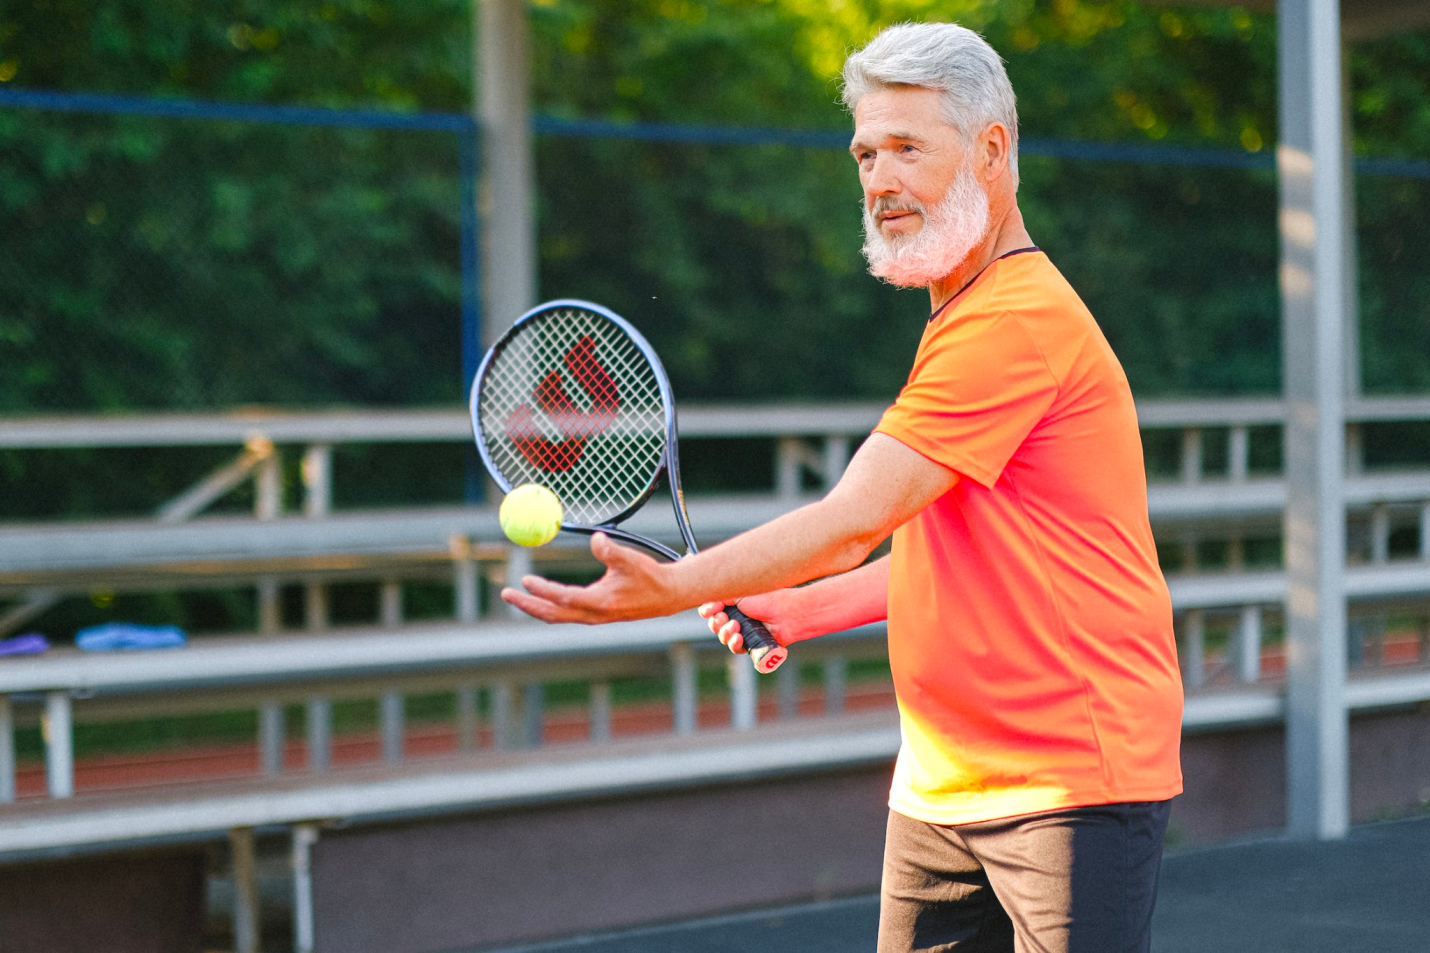  An older man exercises outdoors, playing tennis.